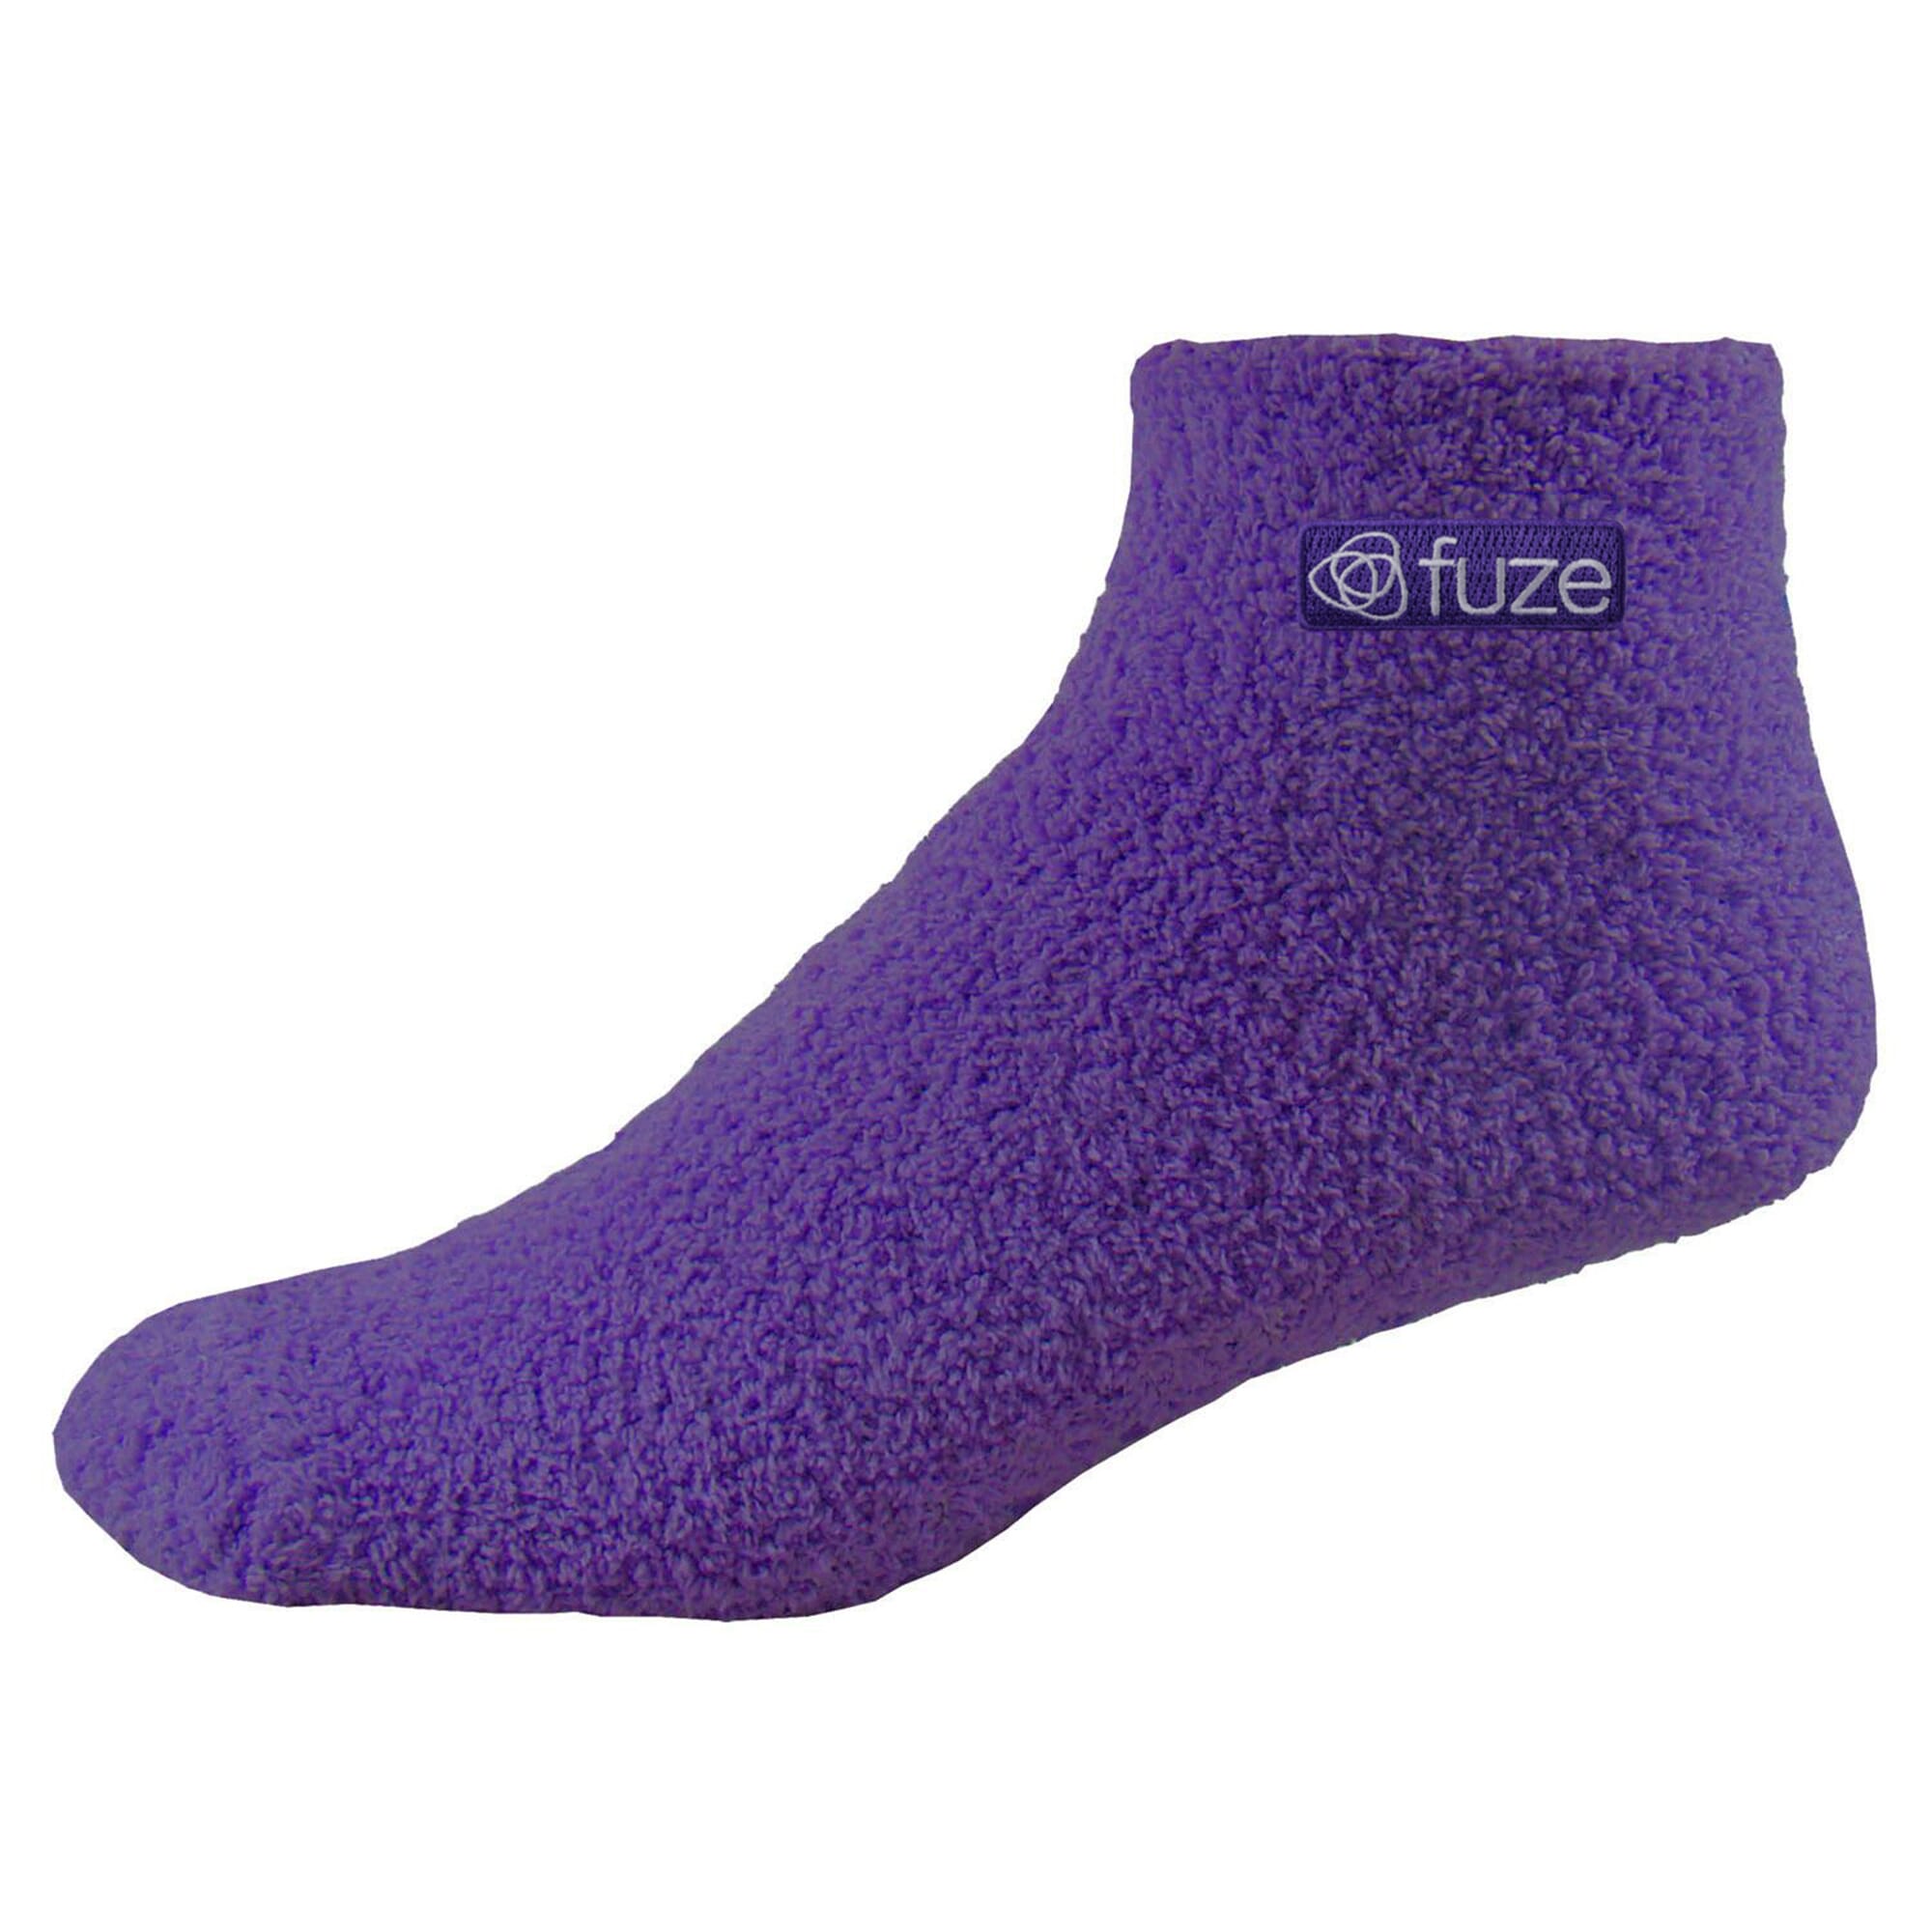 Fuzzy slippers with non-slip grips on sole